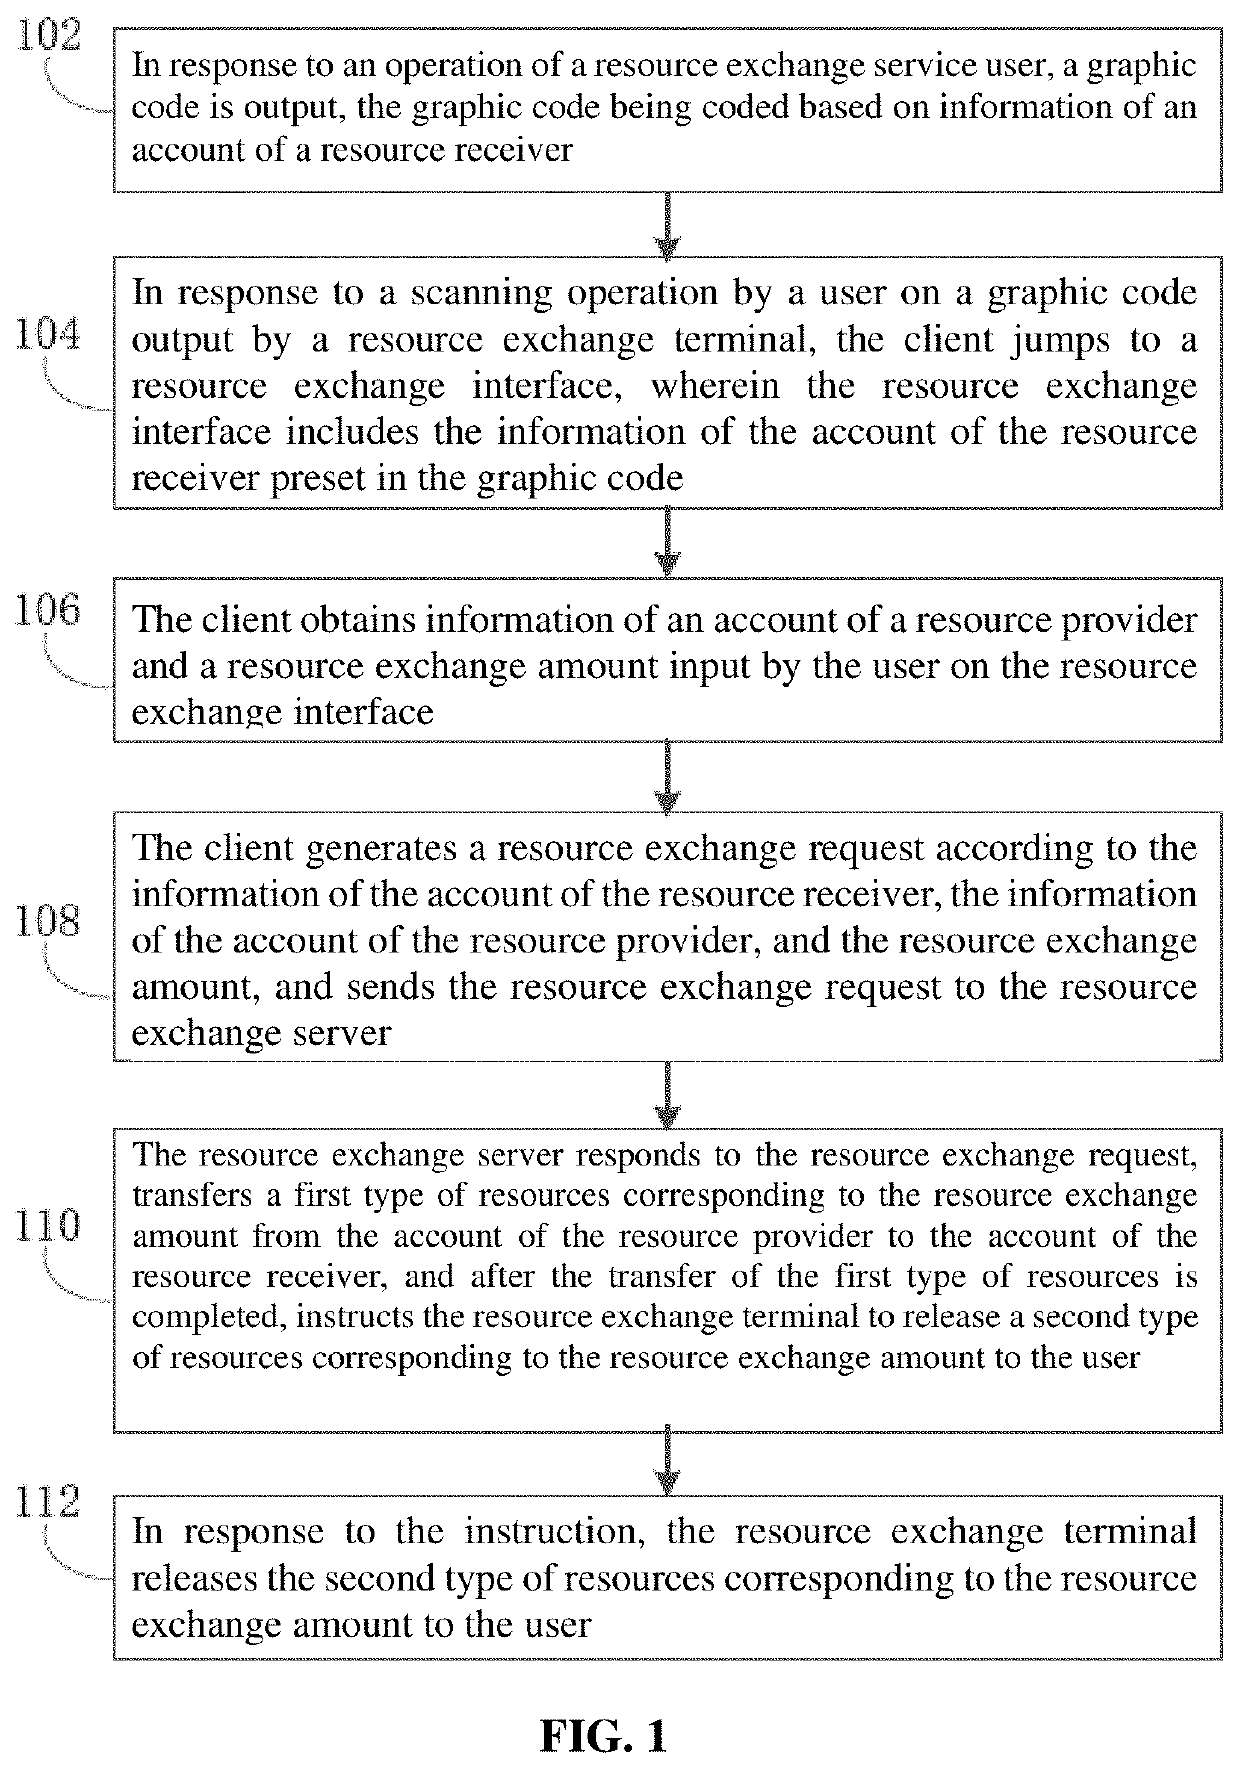 Method and apparatus for resource exchange